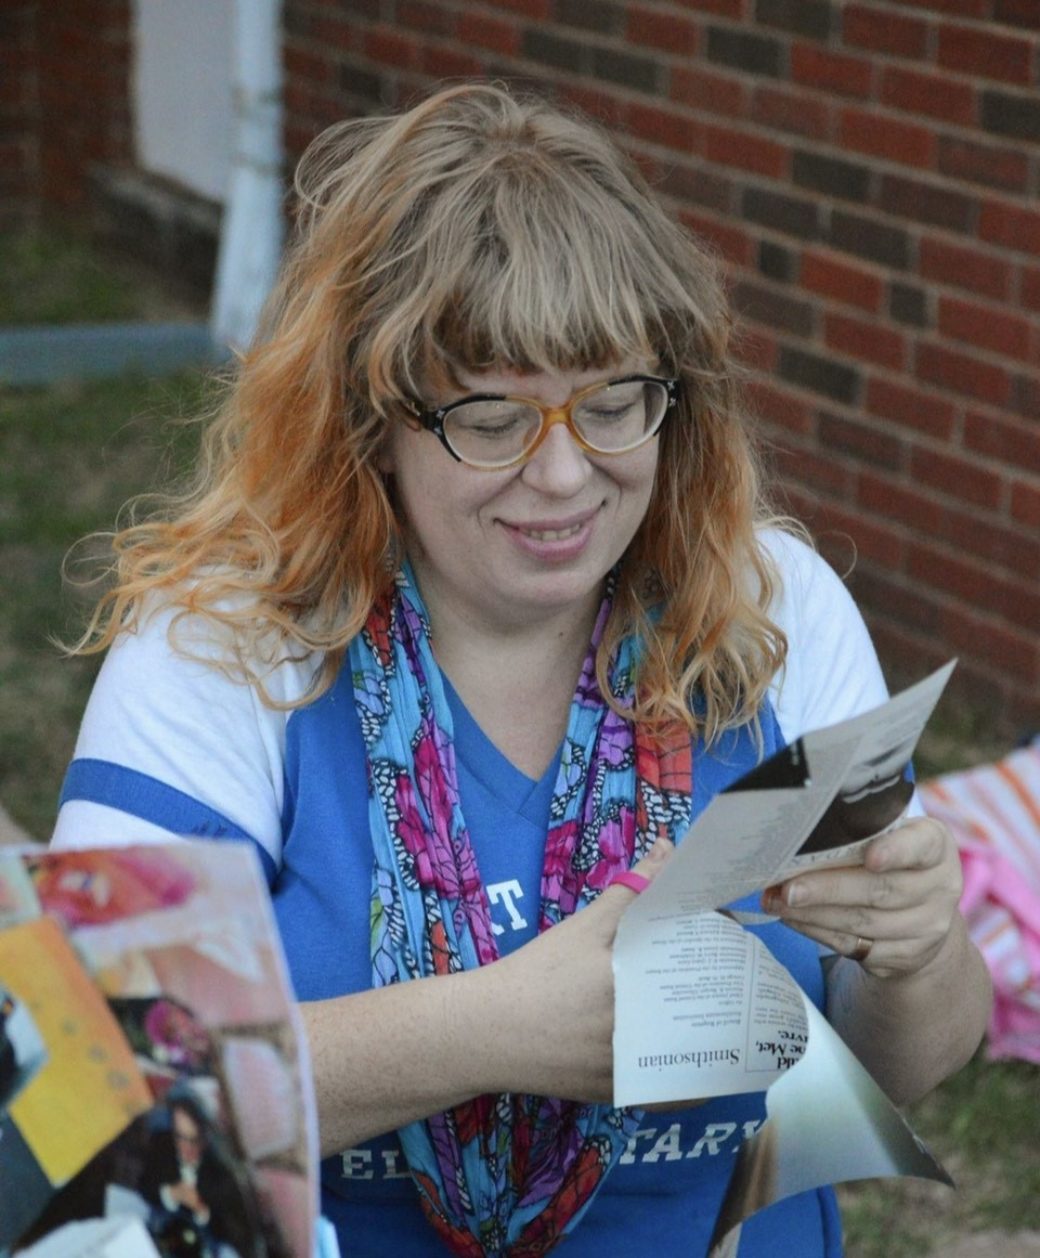 Woman with strawberry blonde hair and glasses focuses on her project of cutting paper